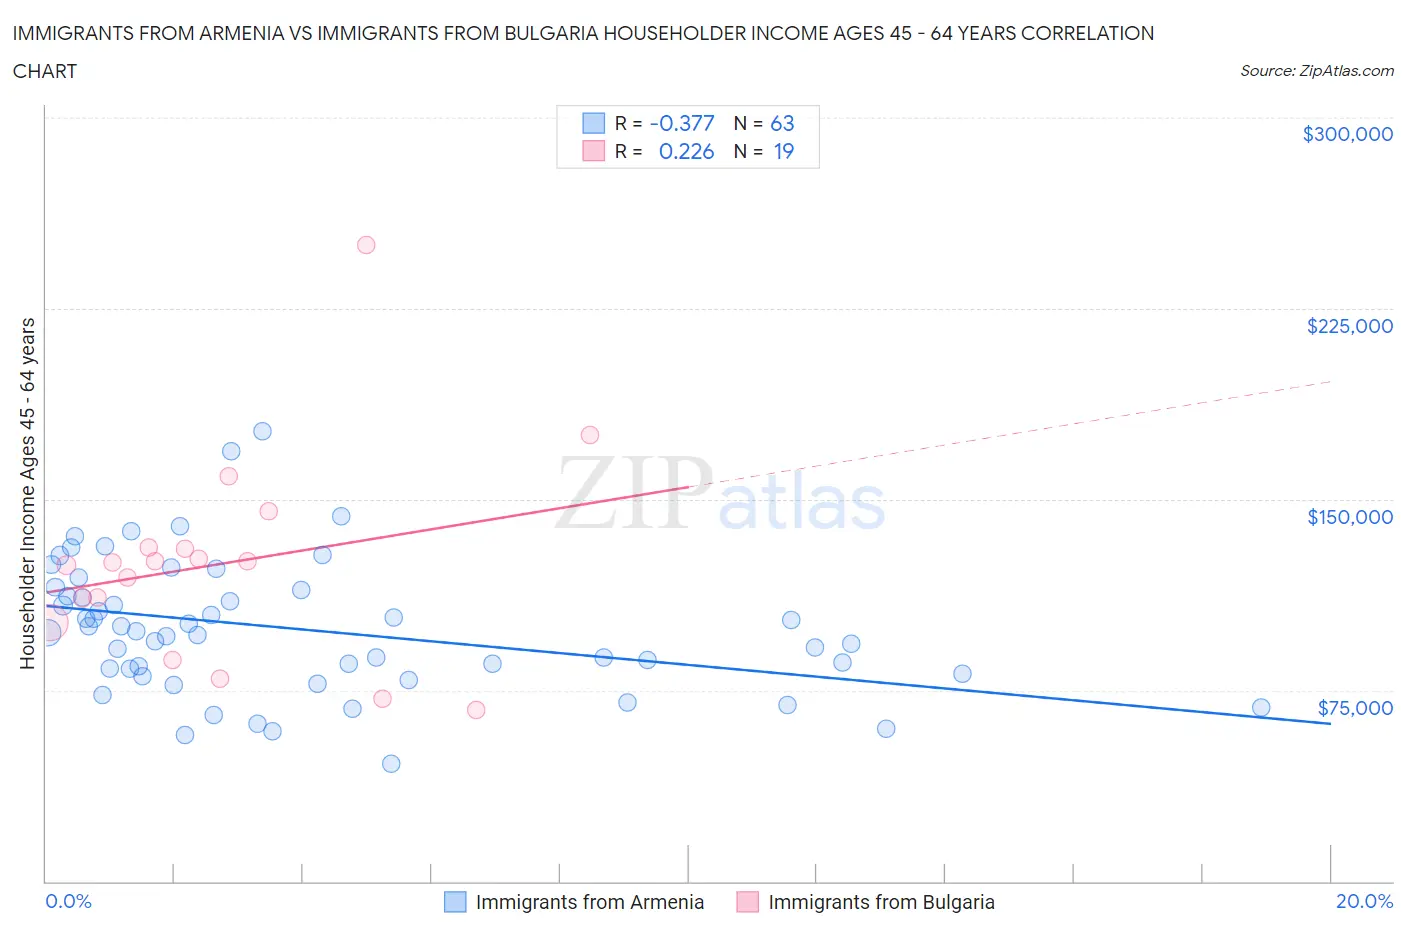 Immigrants from Armenia vs Immigrants from Bulgaria Householder Income Ages 45 - 64 years